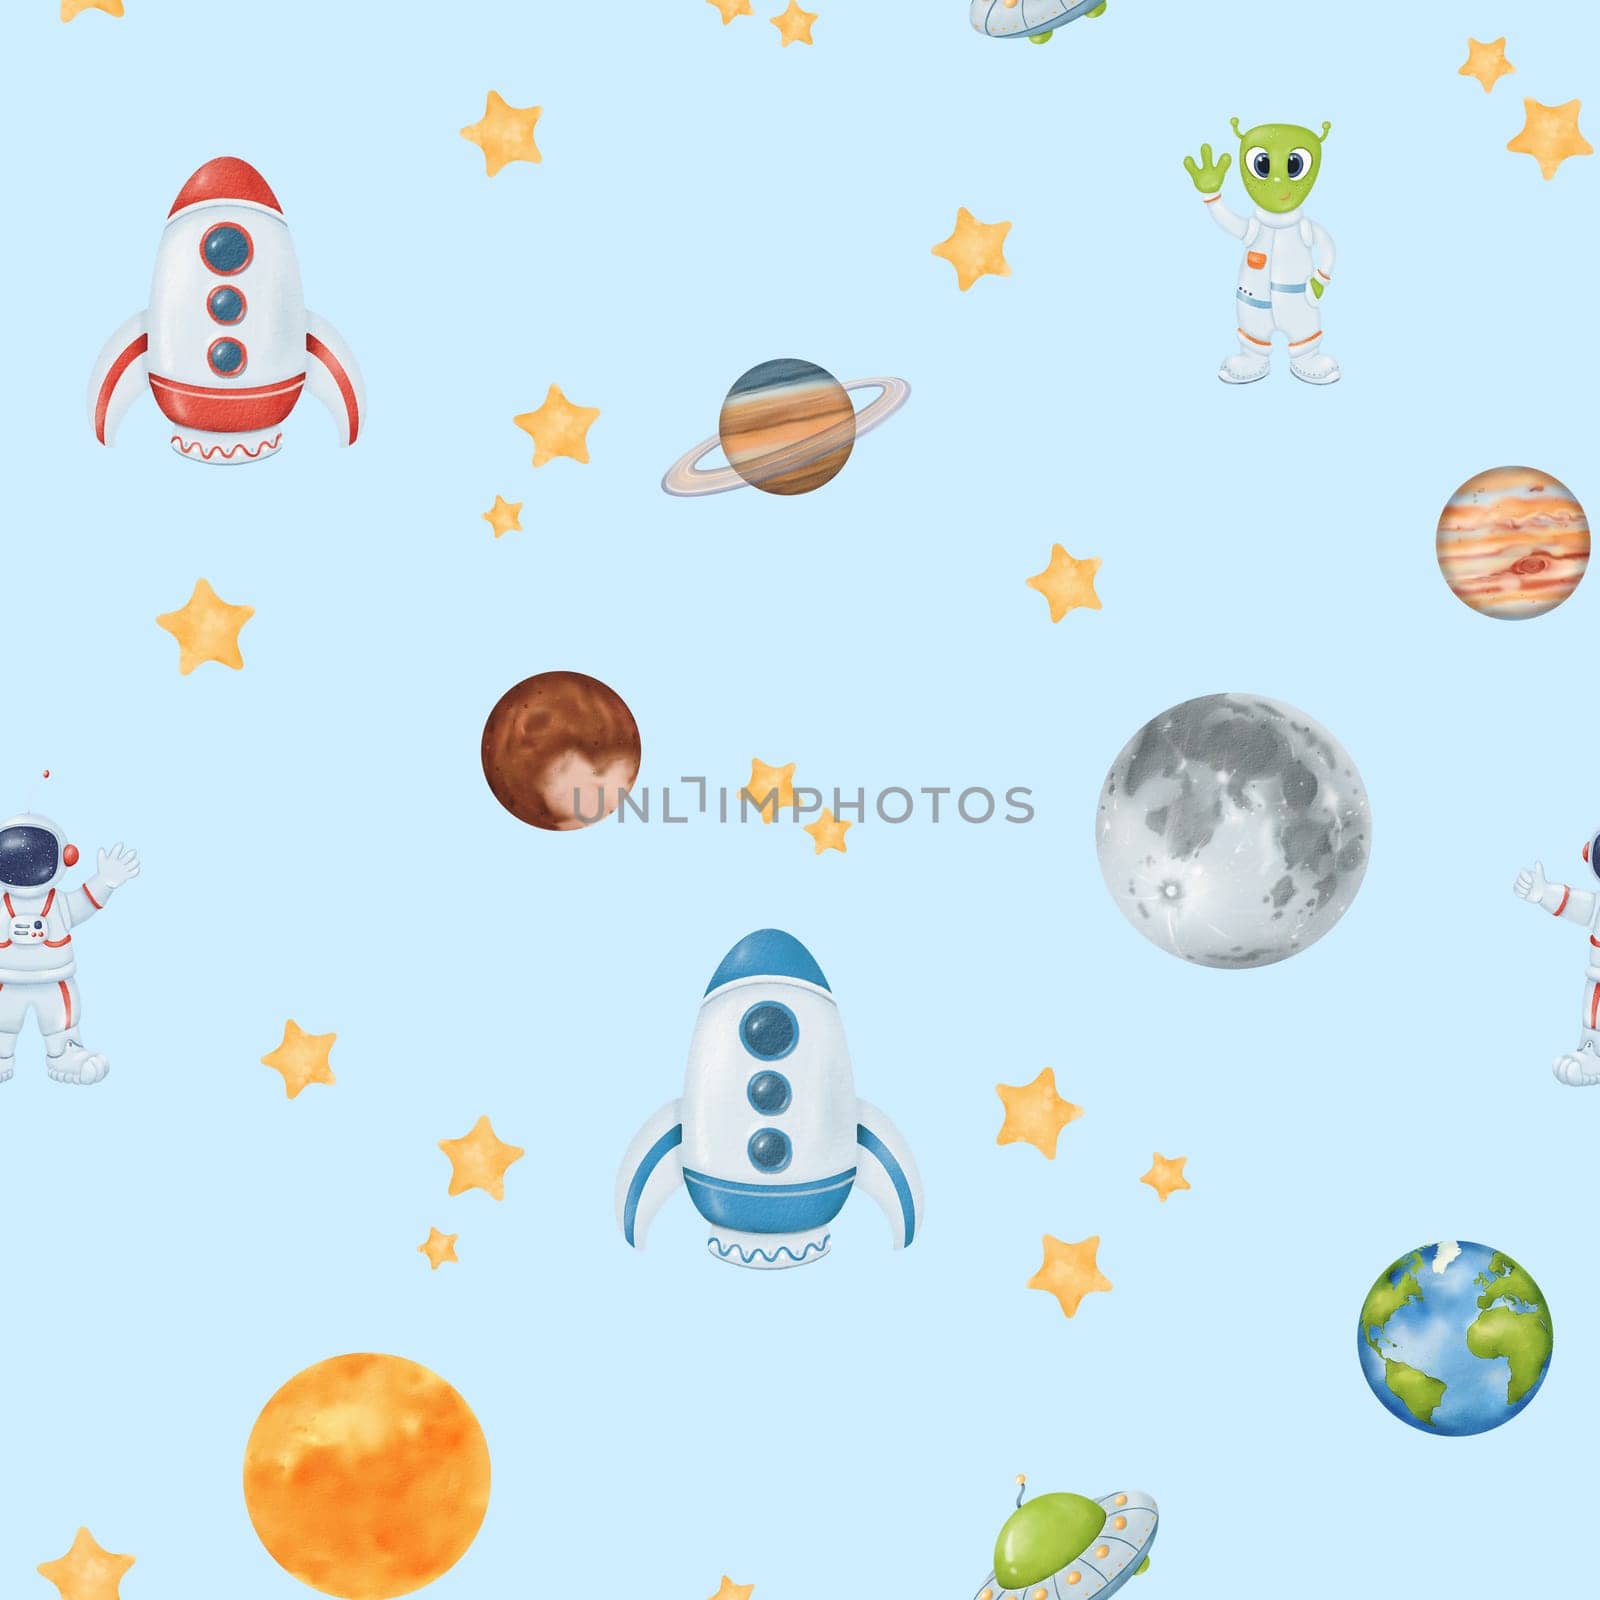 Watercolor seamless pattern of a starry sky. Yellow stars, planet Earth, an astronaut, rocket, moon, and sun. Cosmic theme for kids. for wallpapers, children's rooms, textiles, baby apparel, textbooks.